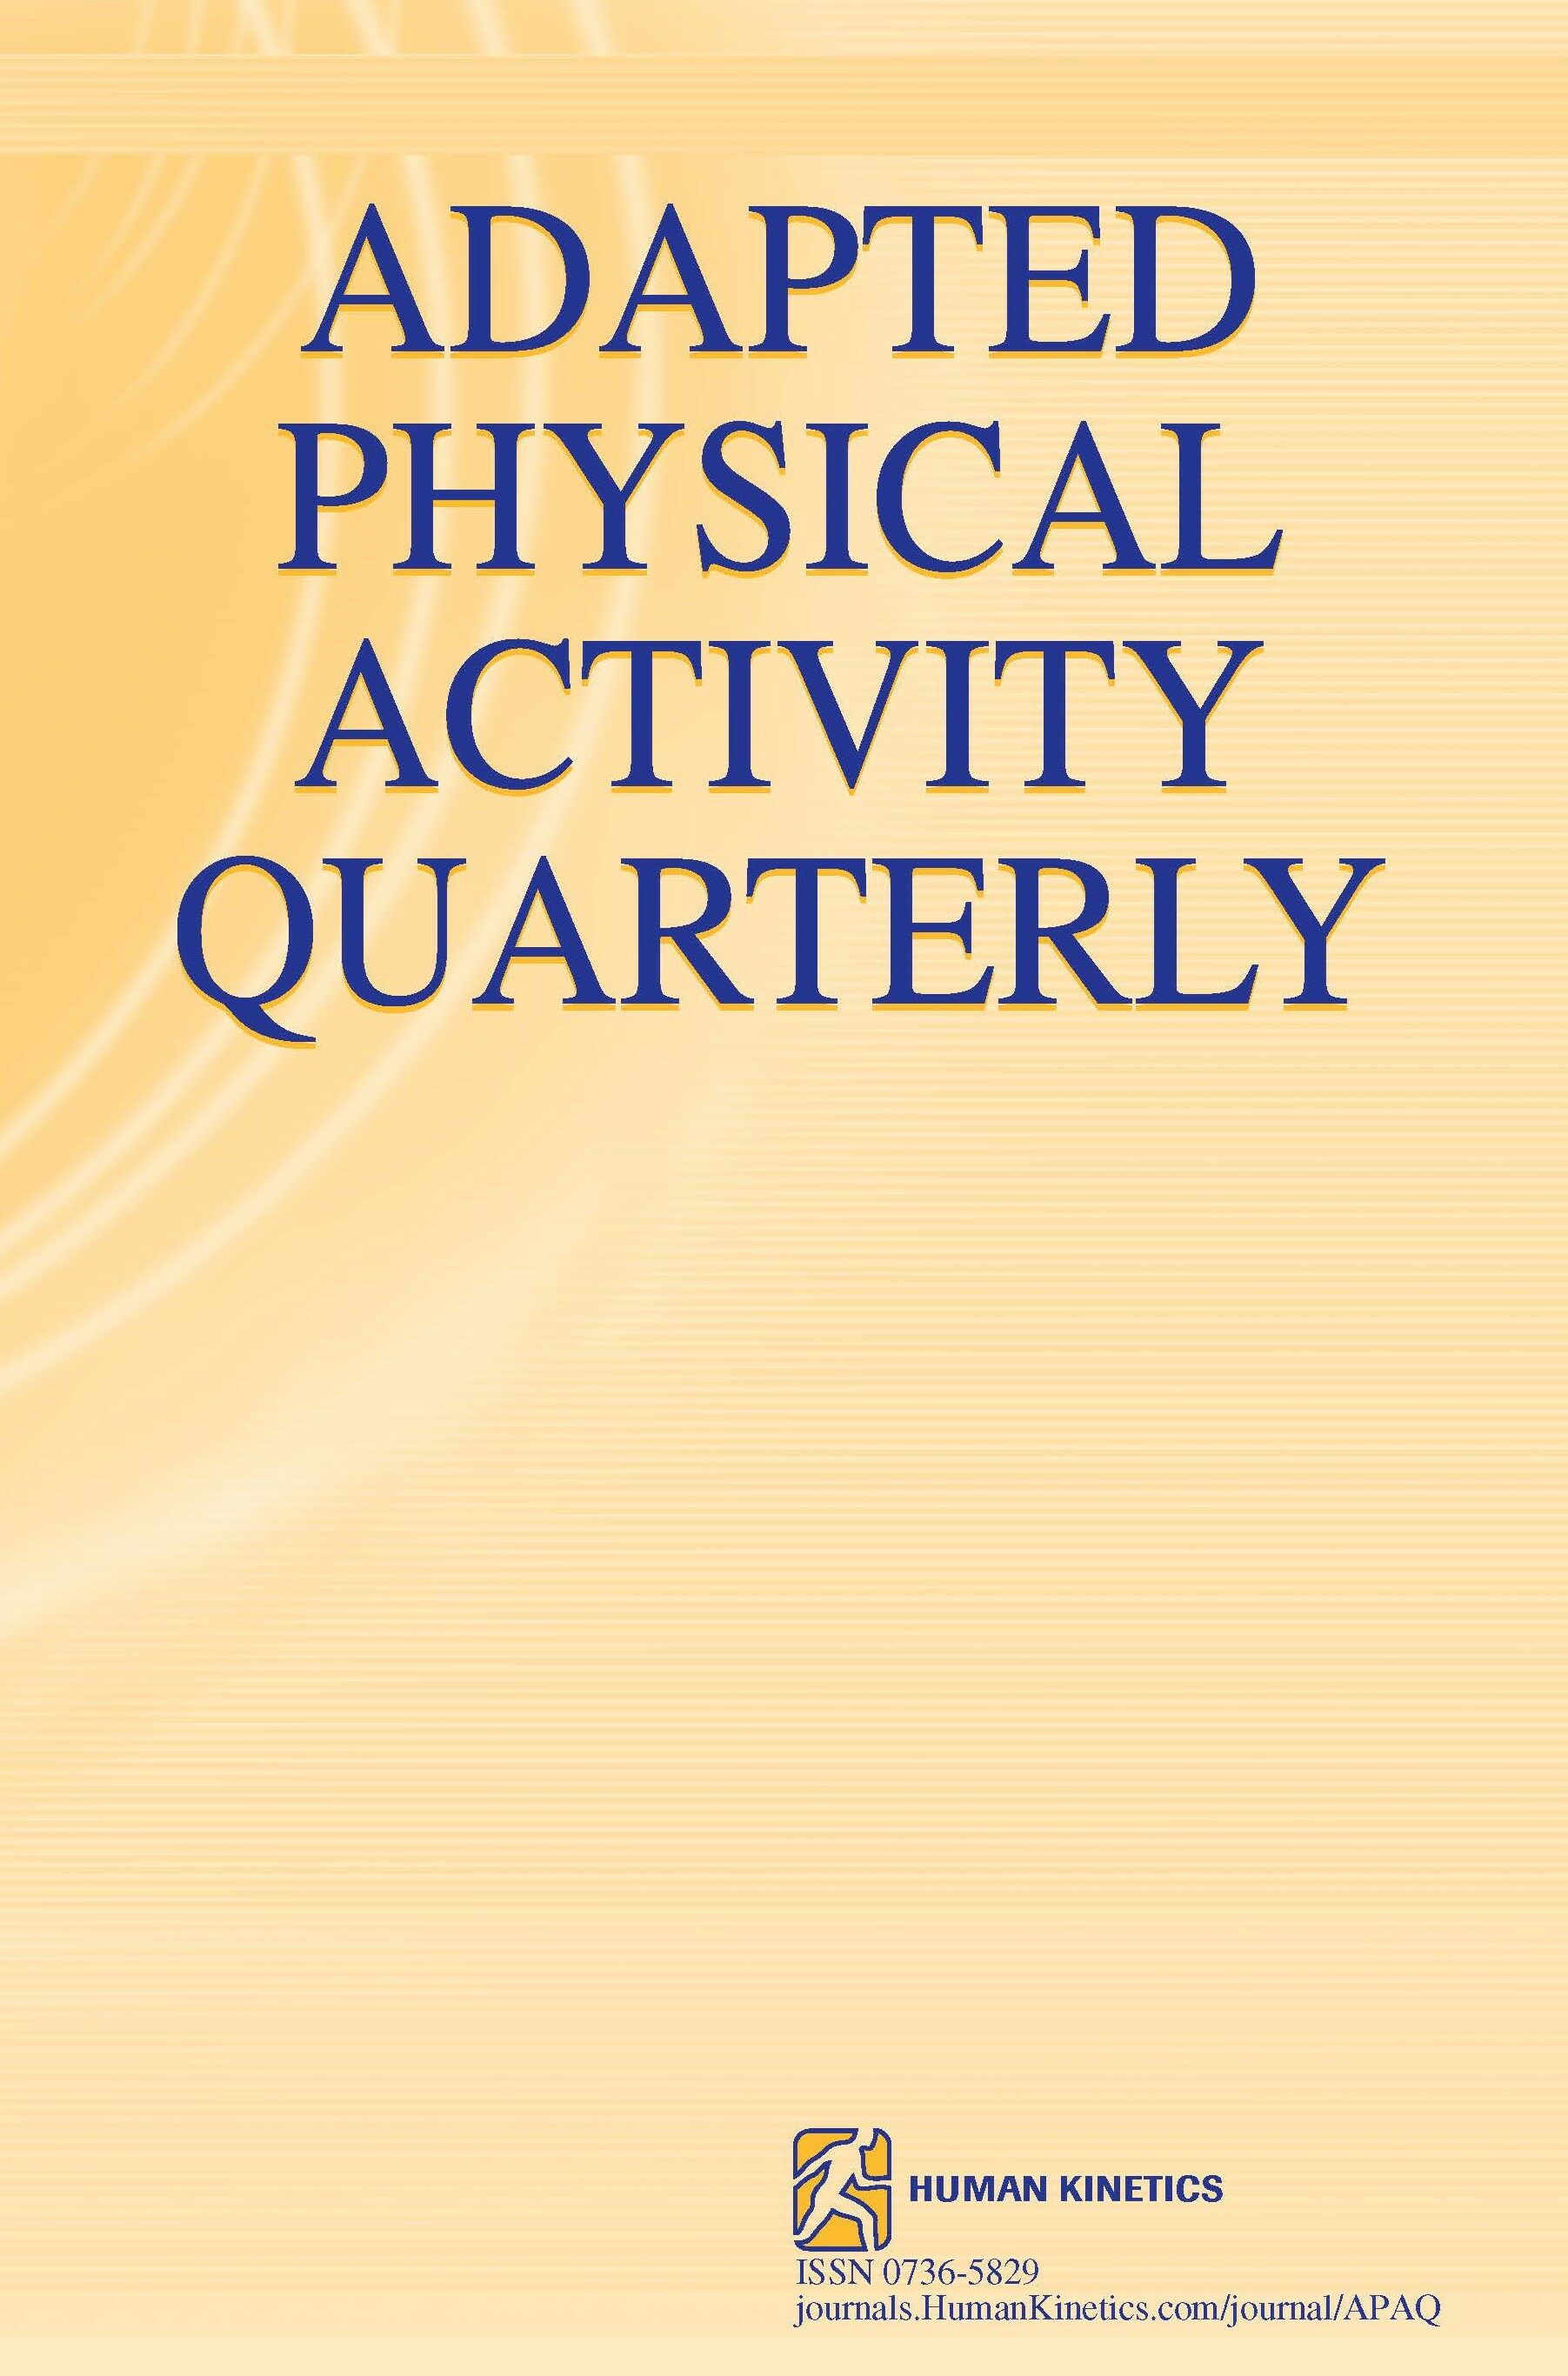 The Self-Efficacy of Physical Education Teachers to Teach Students With Disabilities: A Systematic Review of Literature